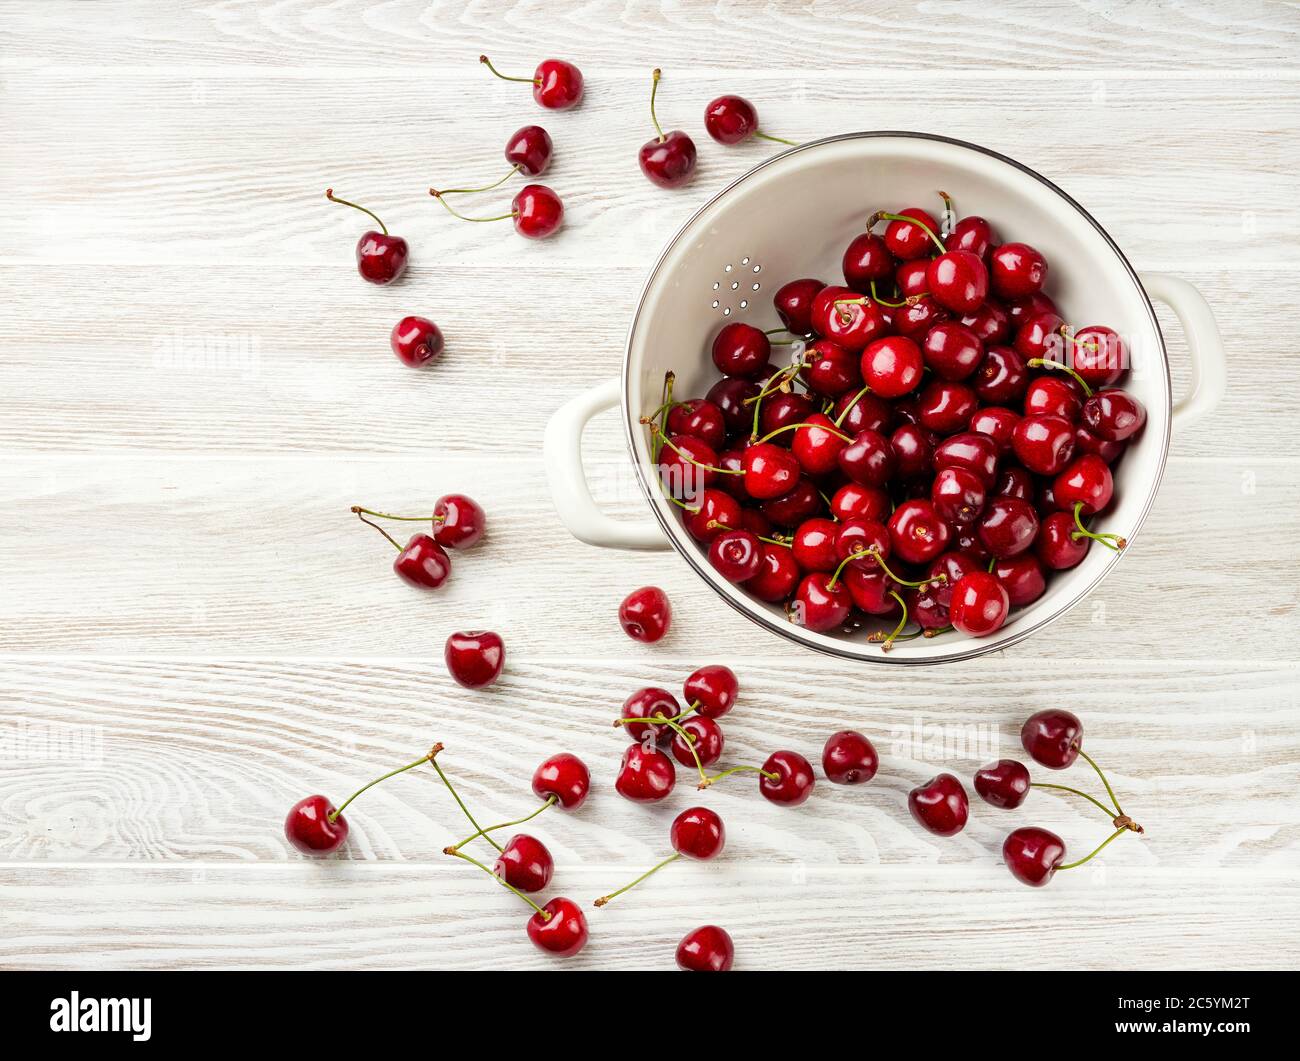 White strainer with fresh cherries on a wooden white background. Top view of colander with cherry berries. Stock Photo